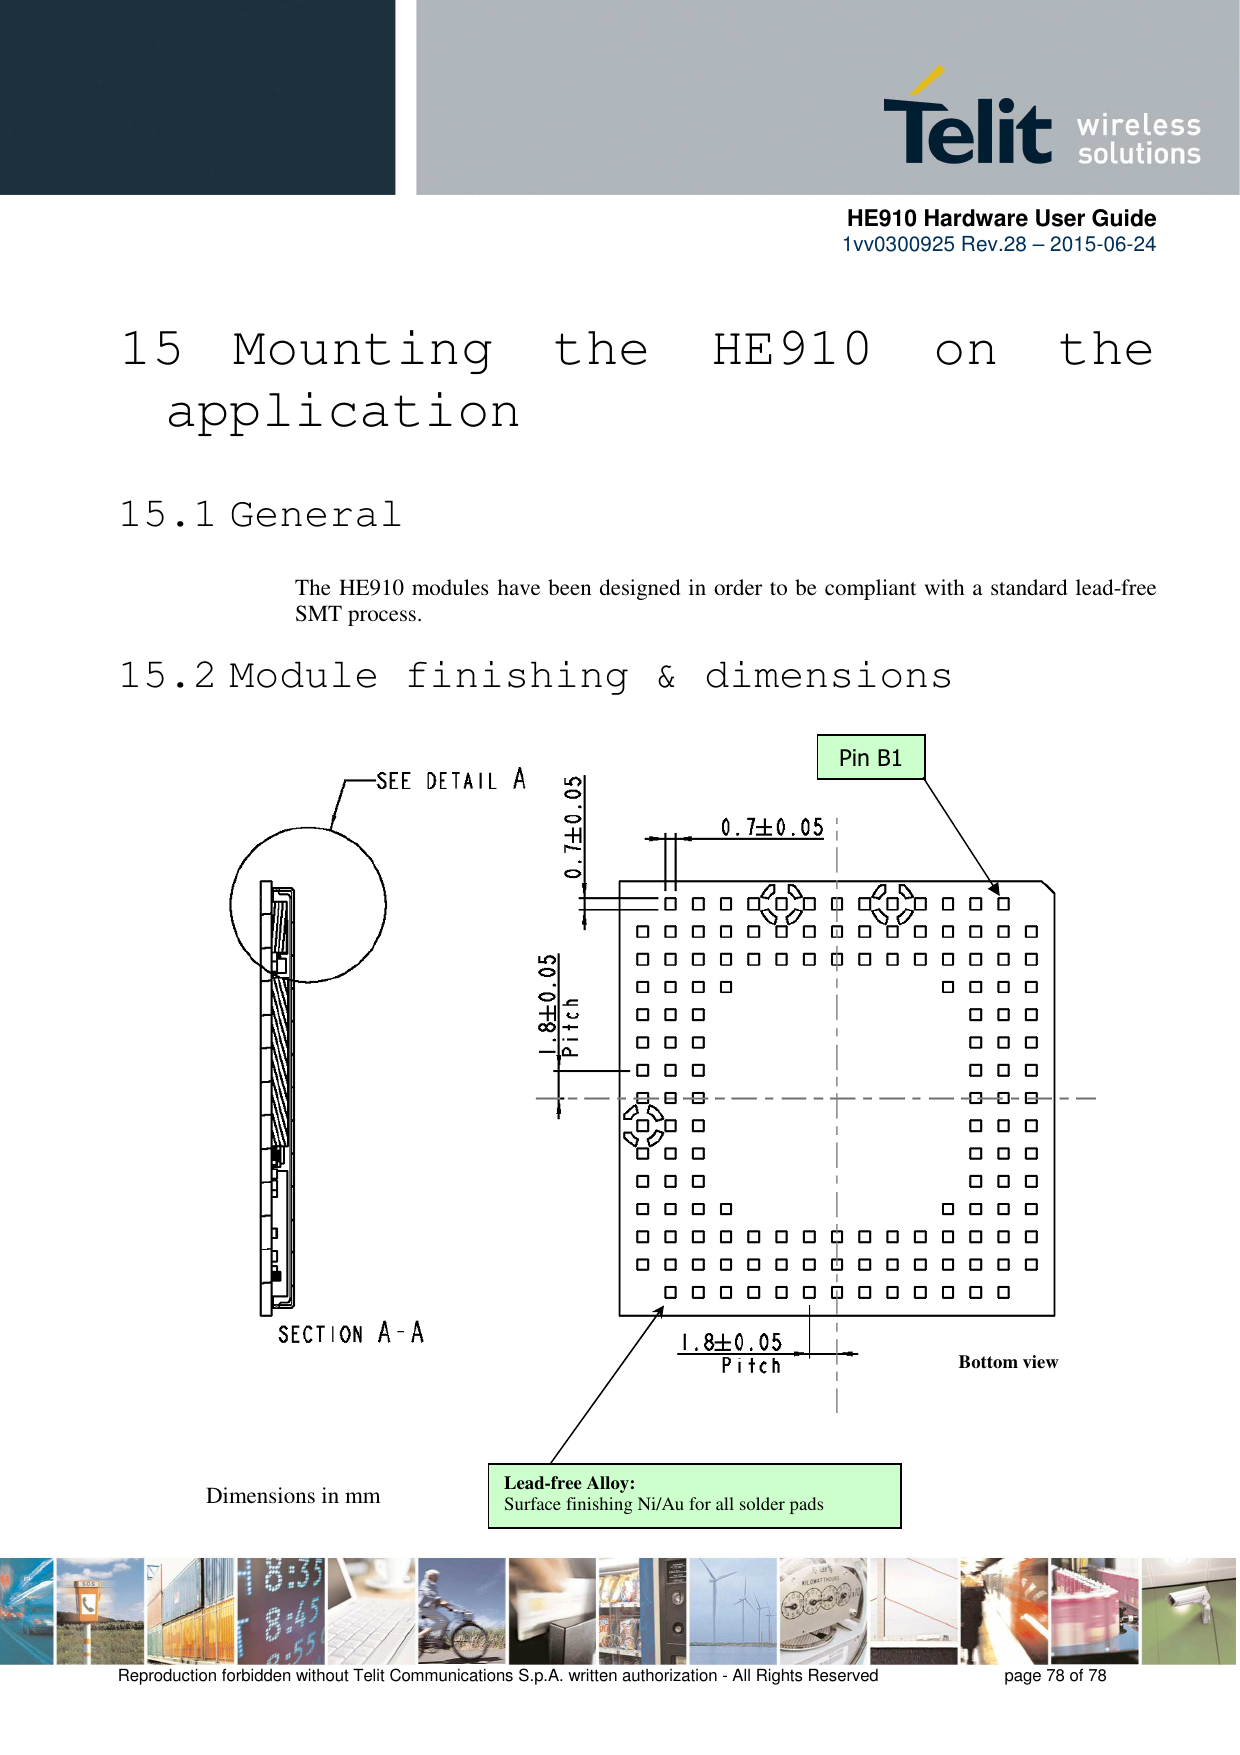      HE910 Hardware User Guide 1vv0300925 Rev.28 – 2015-06-24    Reproduction forbidden without Telit Communications S.p.A. written authorization - All Rights Reserved    page 78 of 78   15  Mounting  the  HE910  on  the application 15.1 General The HE910 modules have been designed in order to be compliant with a standard lead-free SMT process. 15.2 Module finishing &amp; dimensions Pin B1 Dimensions in mm Bottom view Lead-free Alloy: Surface finishing Ni/Au for all solder pads  